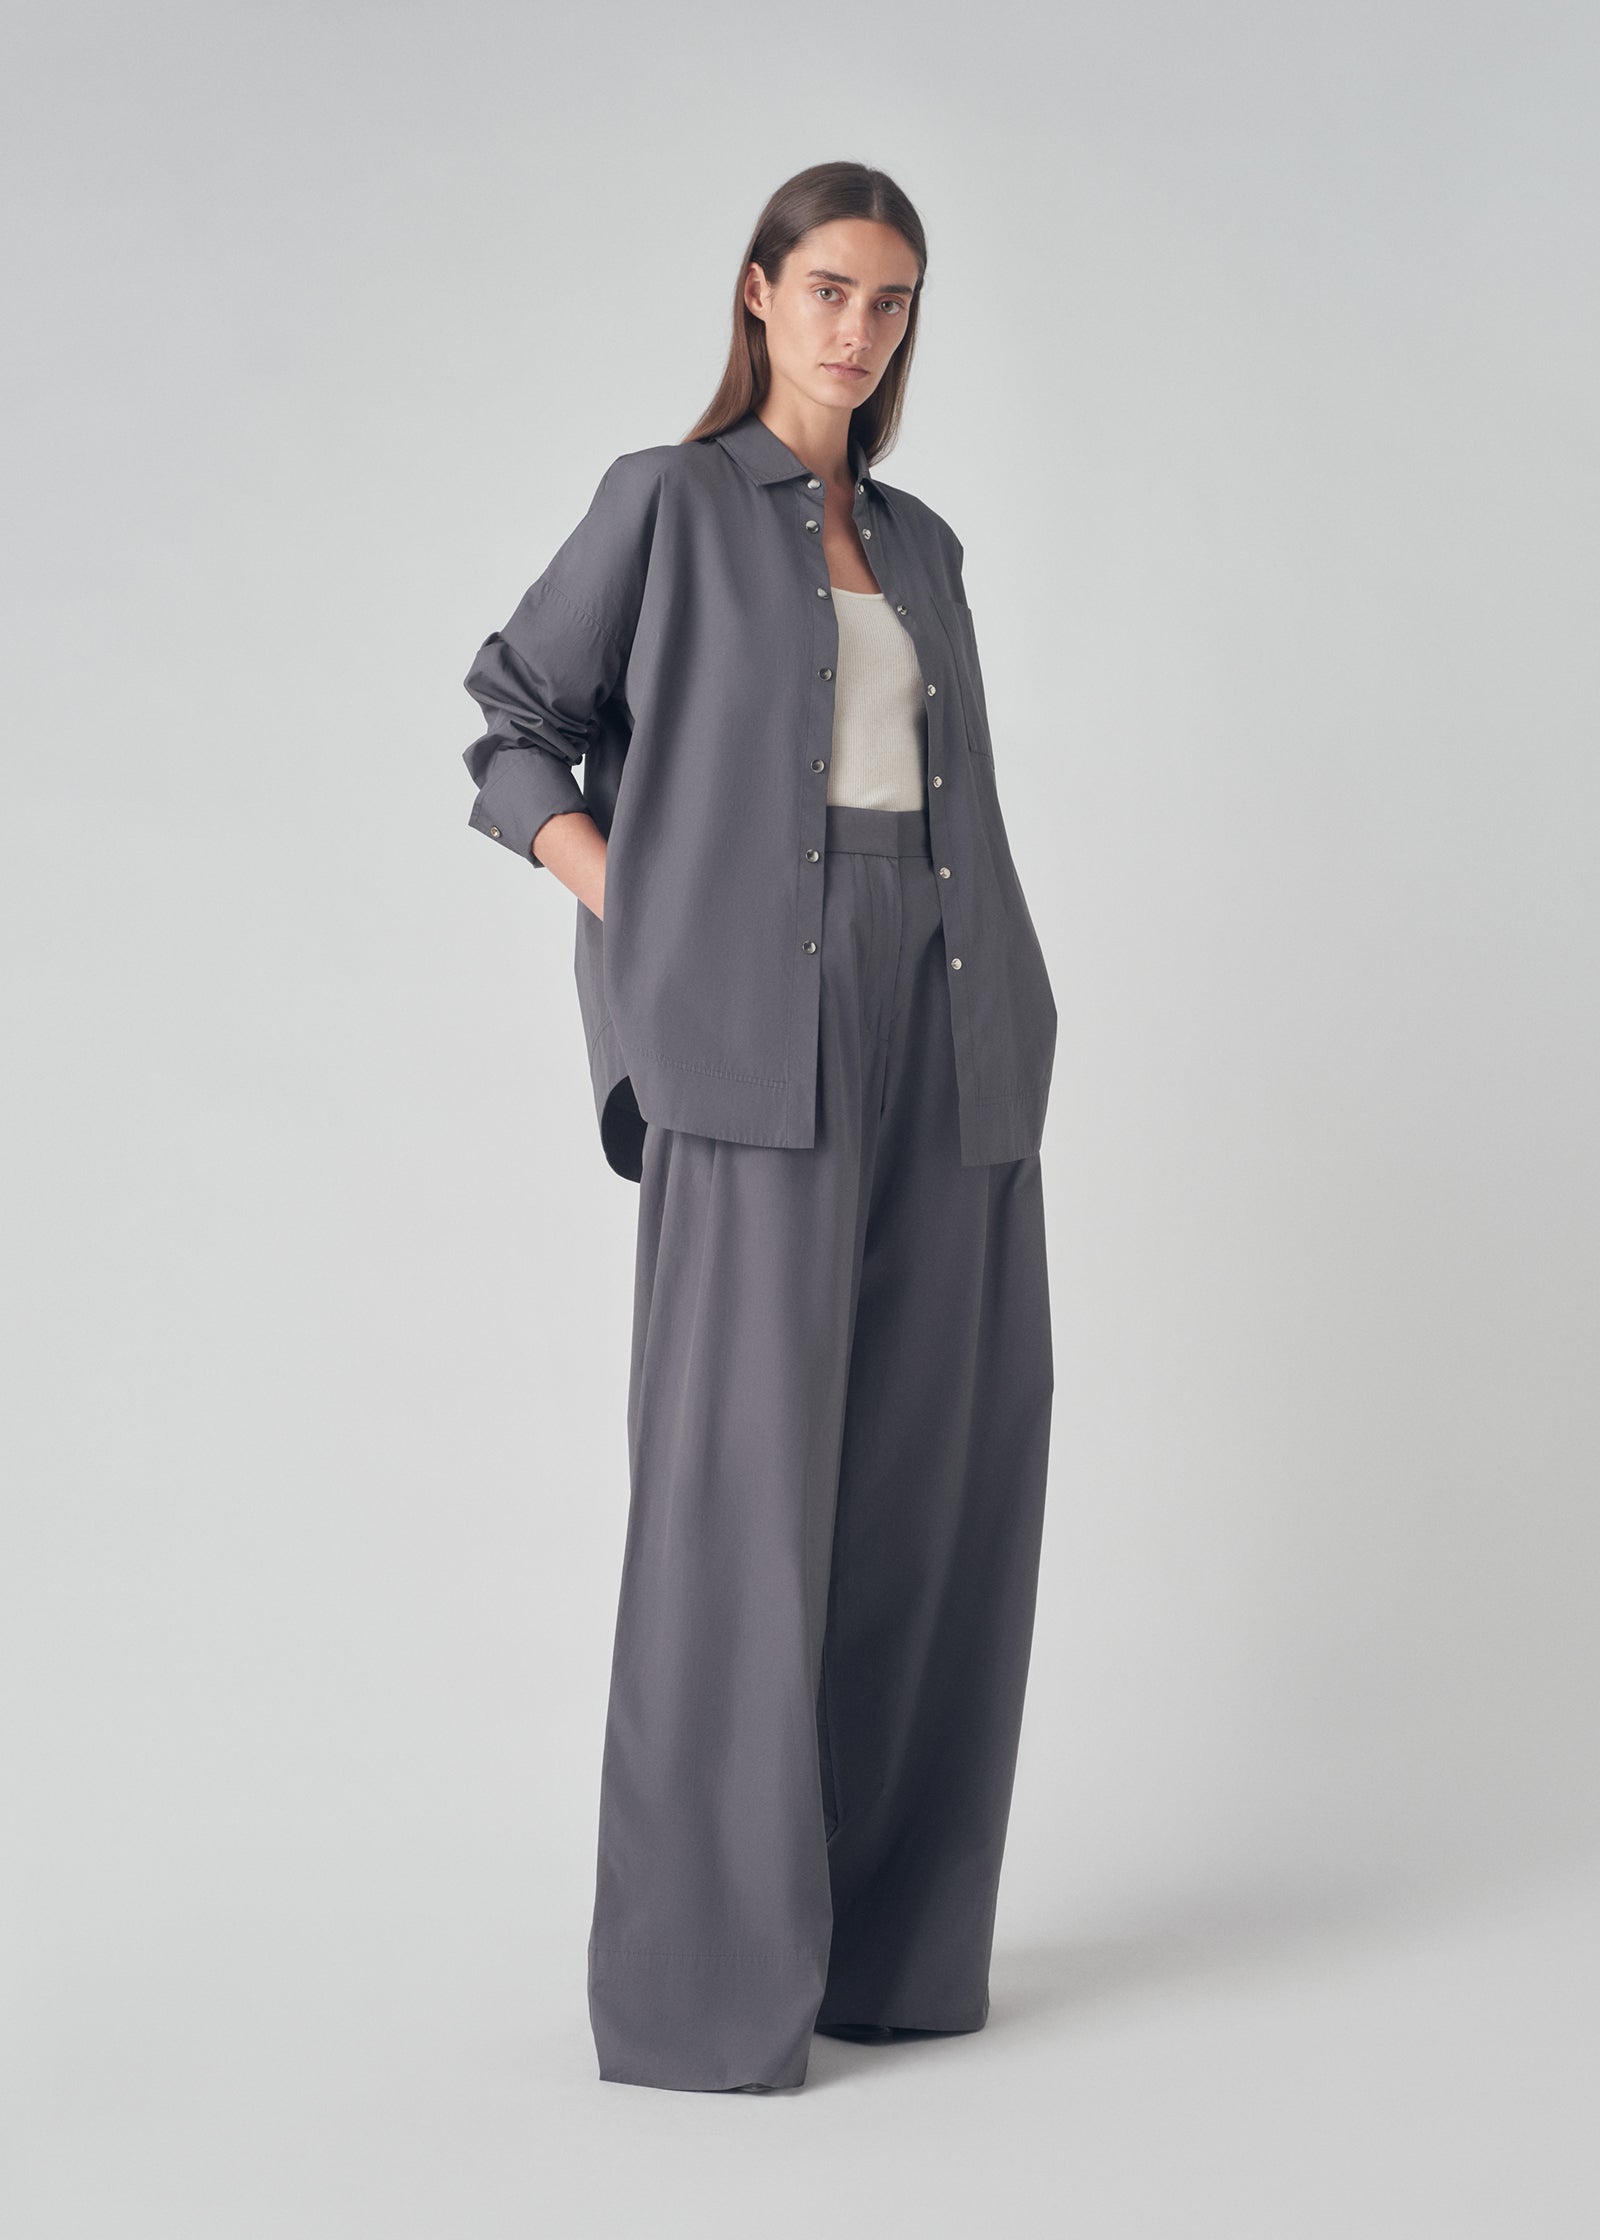 Wide Leg Trouser in Cotton - Charcoal - CO Collections